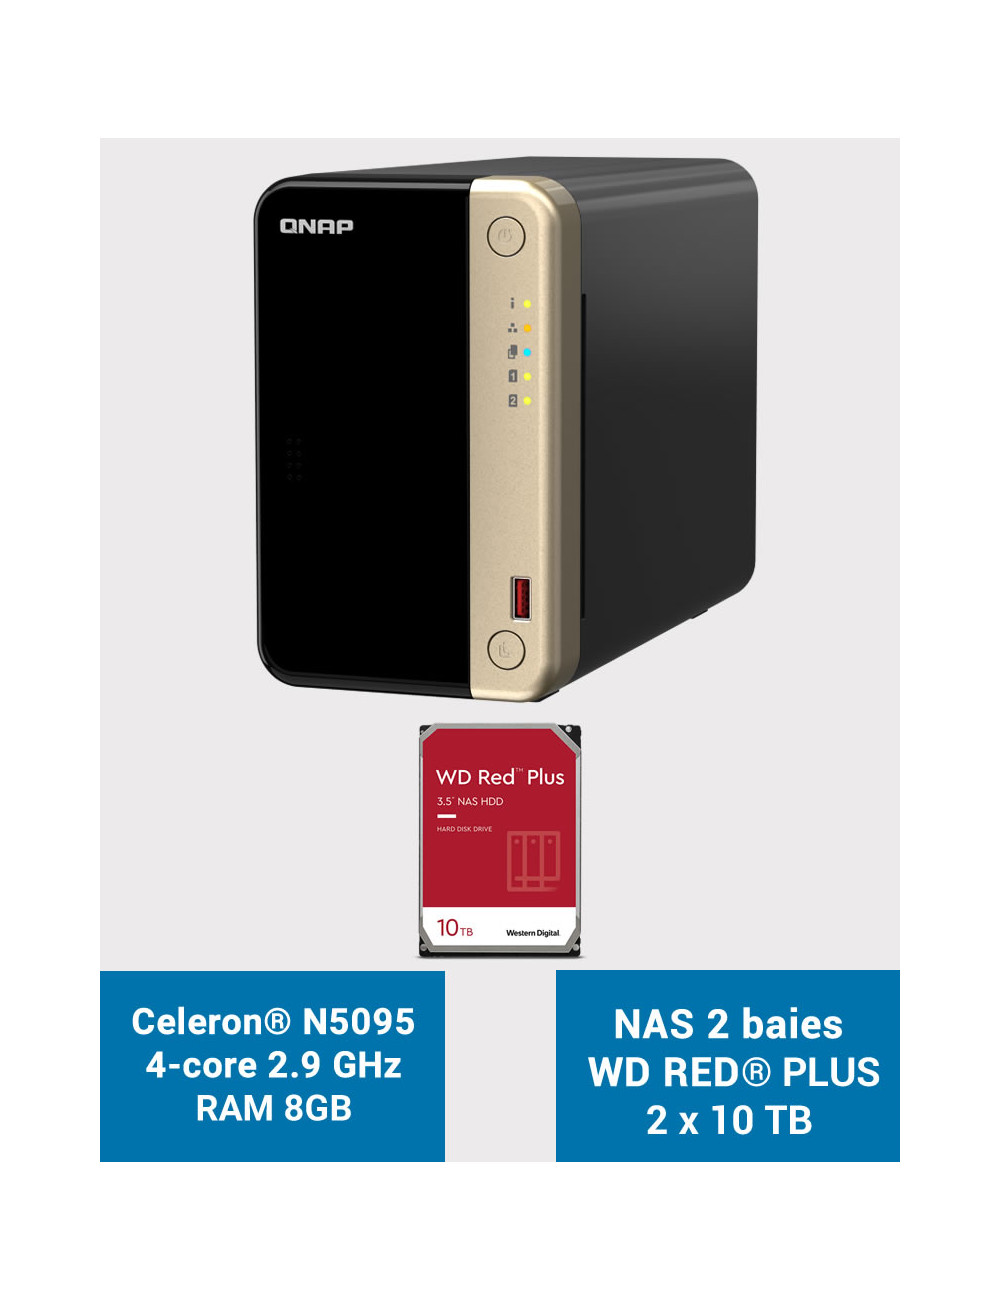 QNAP TS-264 8GB Serveur NAS 2 baies WD RED PLUS 20To (2x10To)